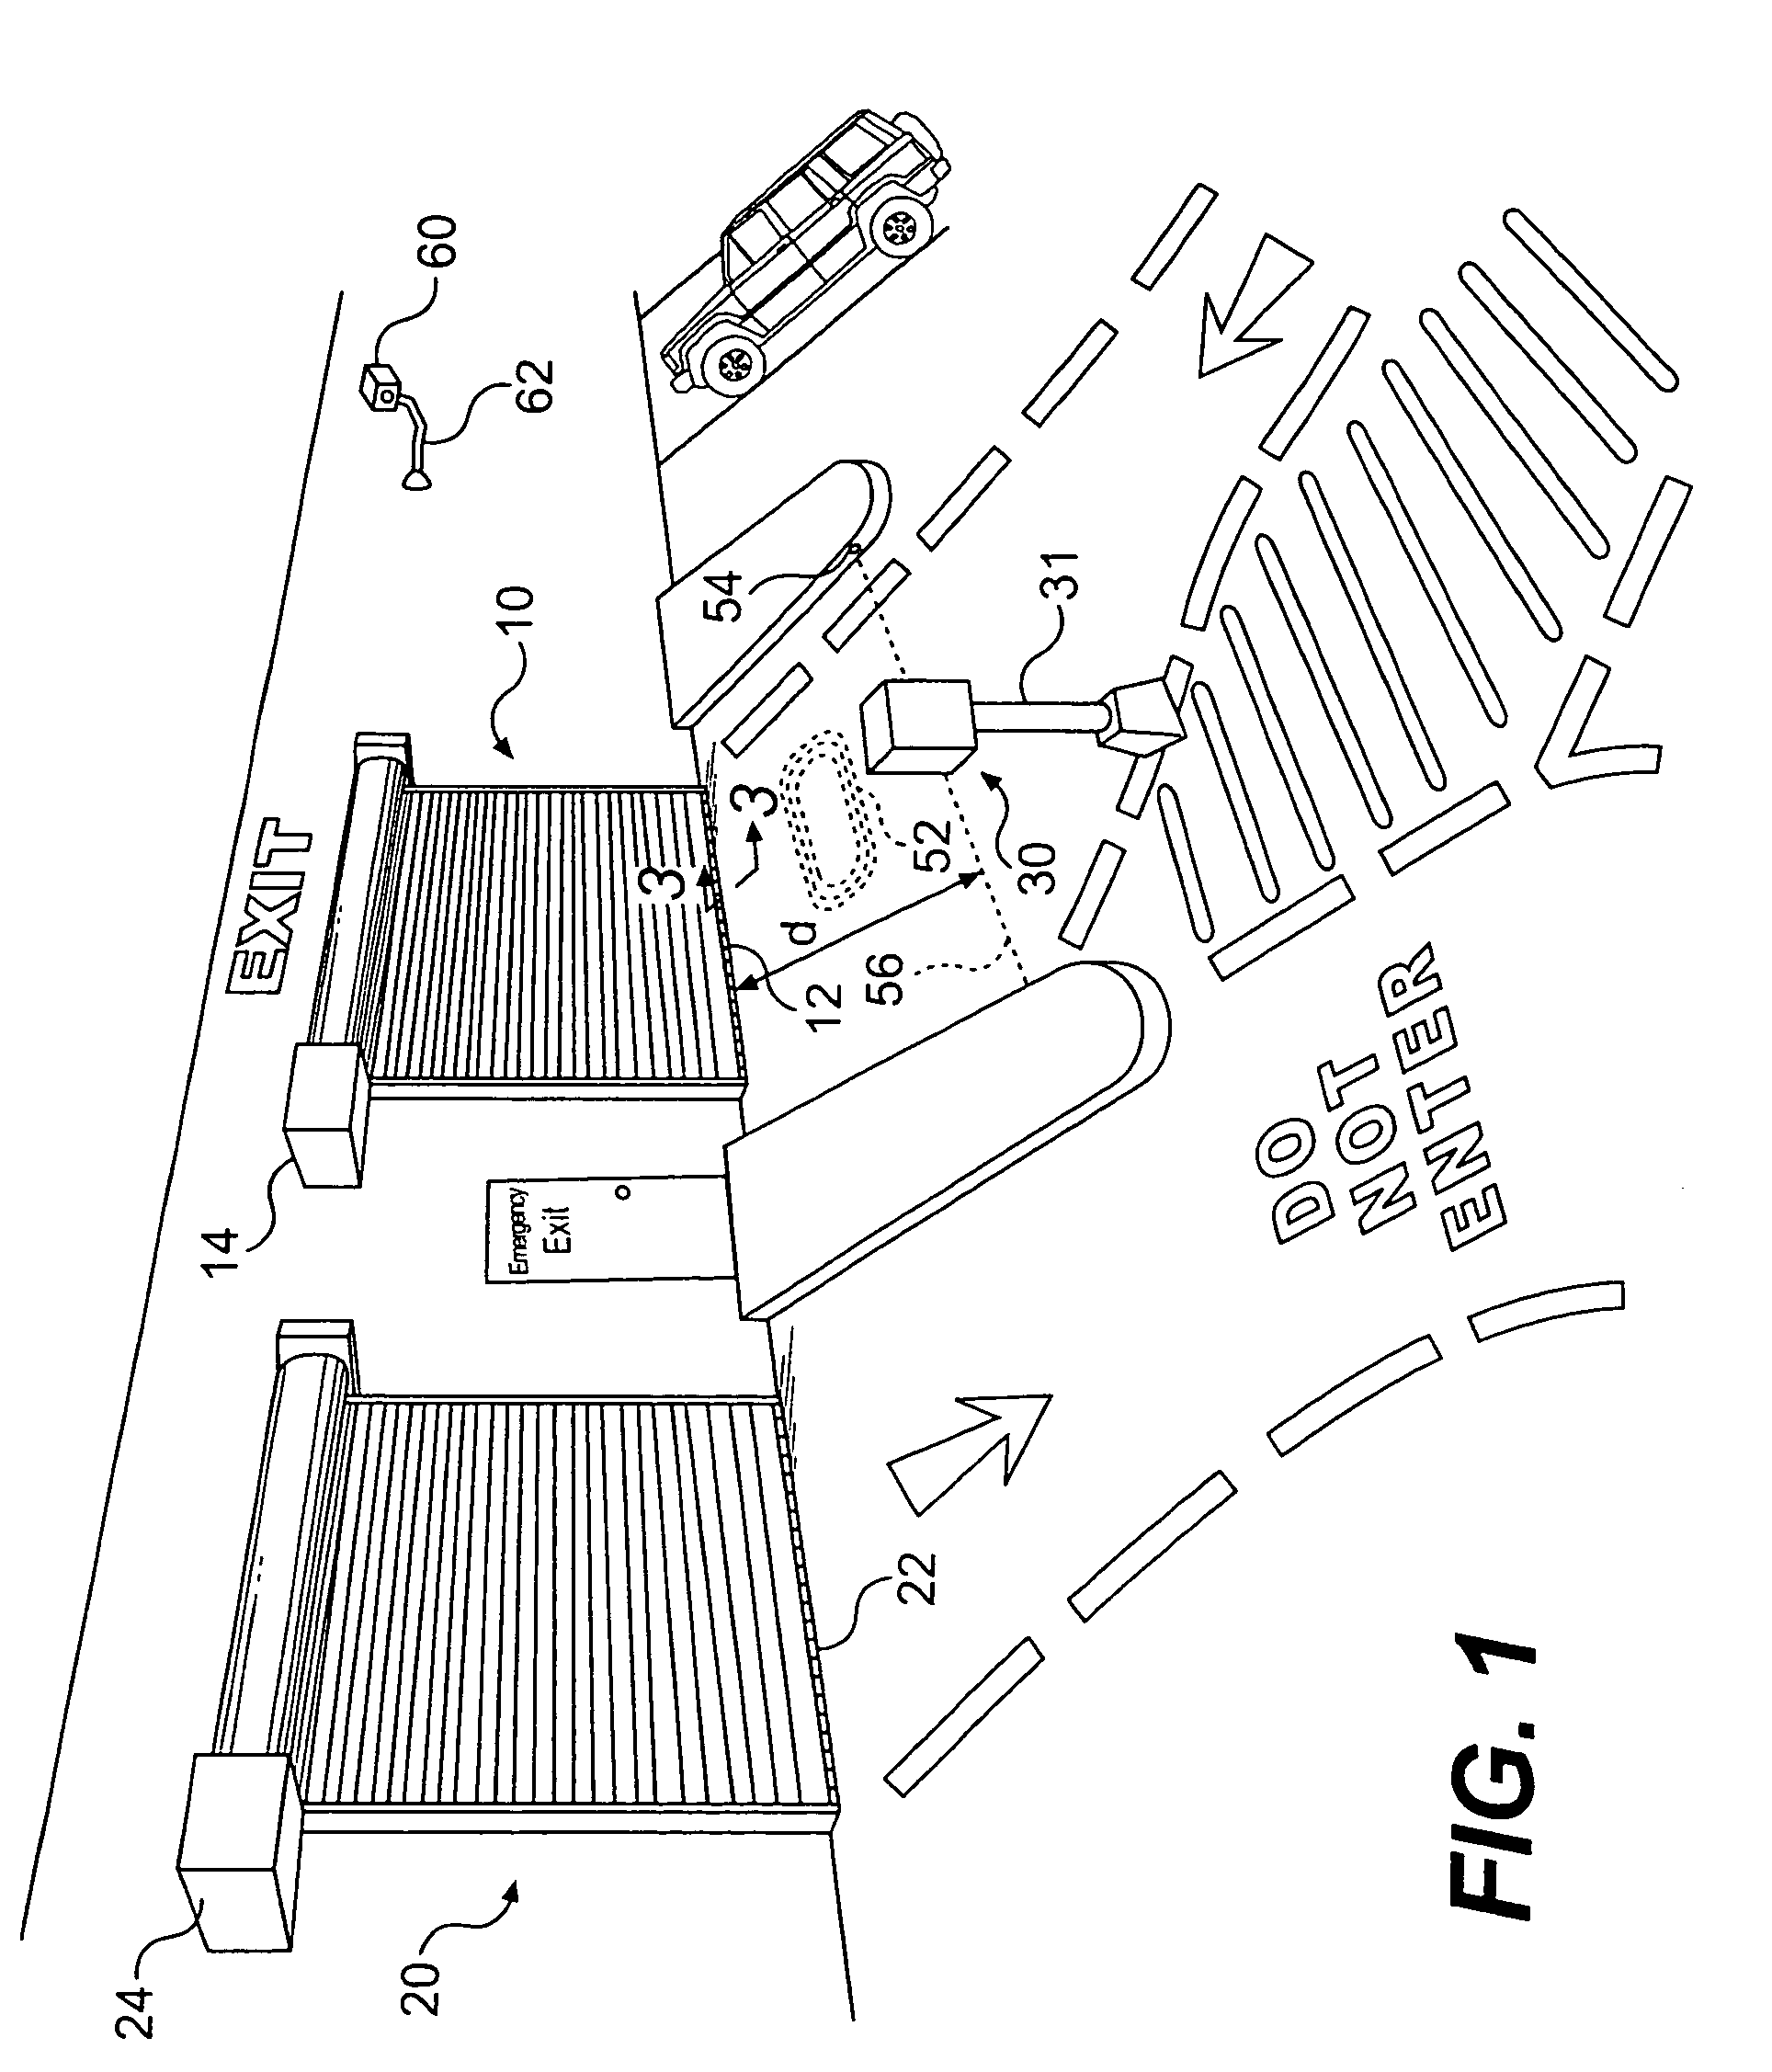 Parking barrier with accident event logging and self-diagnostic control system